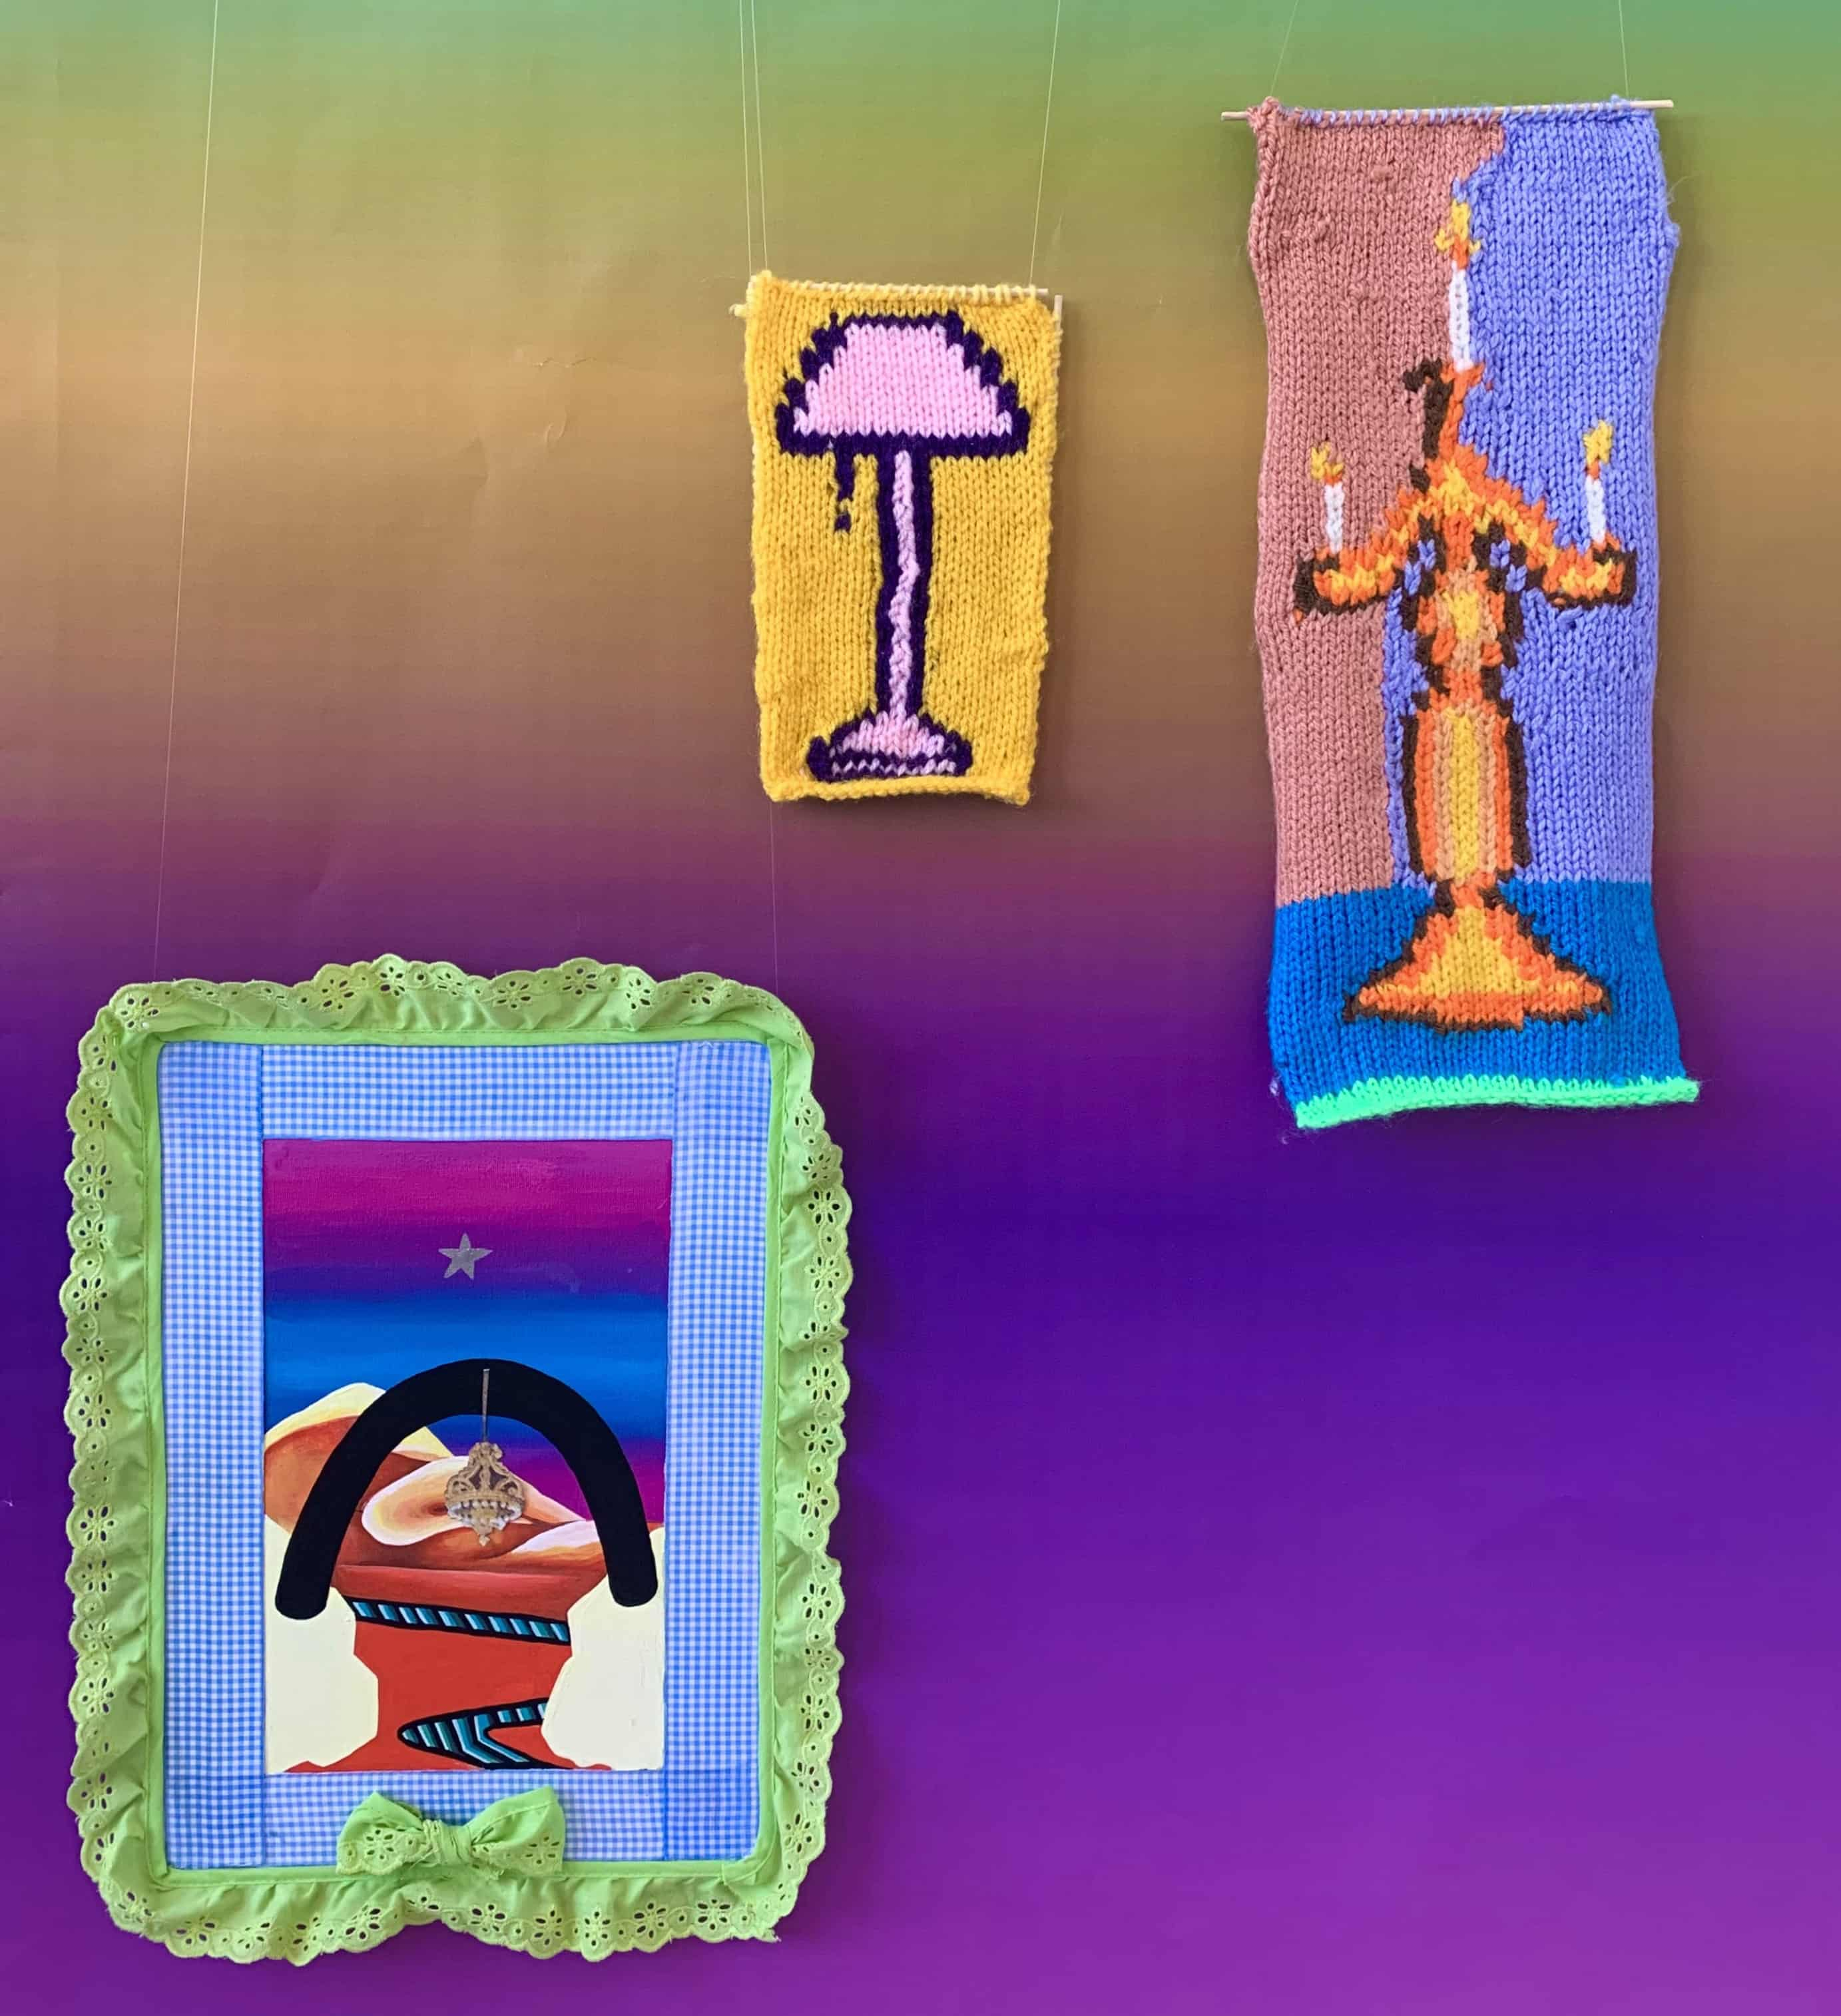 Three separate pieces hanging on a gradient background. One is a mixed media painting, and the other two are small knitted tapestries. The one on the right depicts an orange and yellow candelabra on a pink and purple background. The centre tapestry is a pink lamp on a yellow background. The painting on the left is a mixed media gouache painting surrounded by green and blue ribbon. In the centre are desert rocks , between which is a striped green and black river. A black arch hangs over the two front rocks.